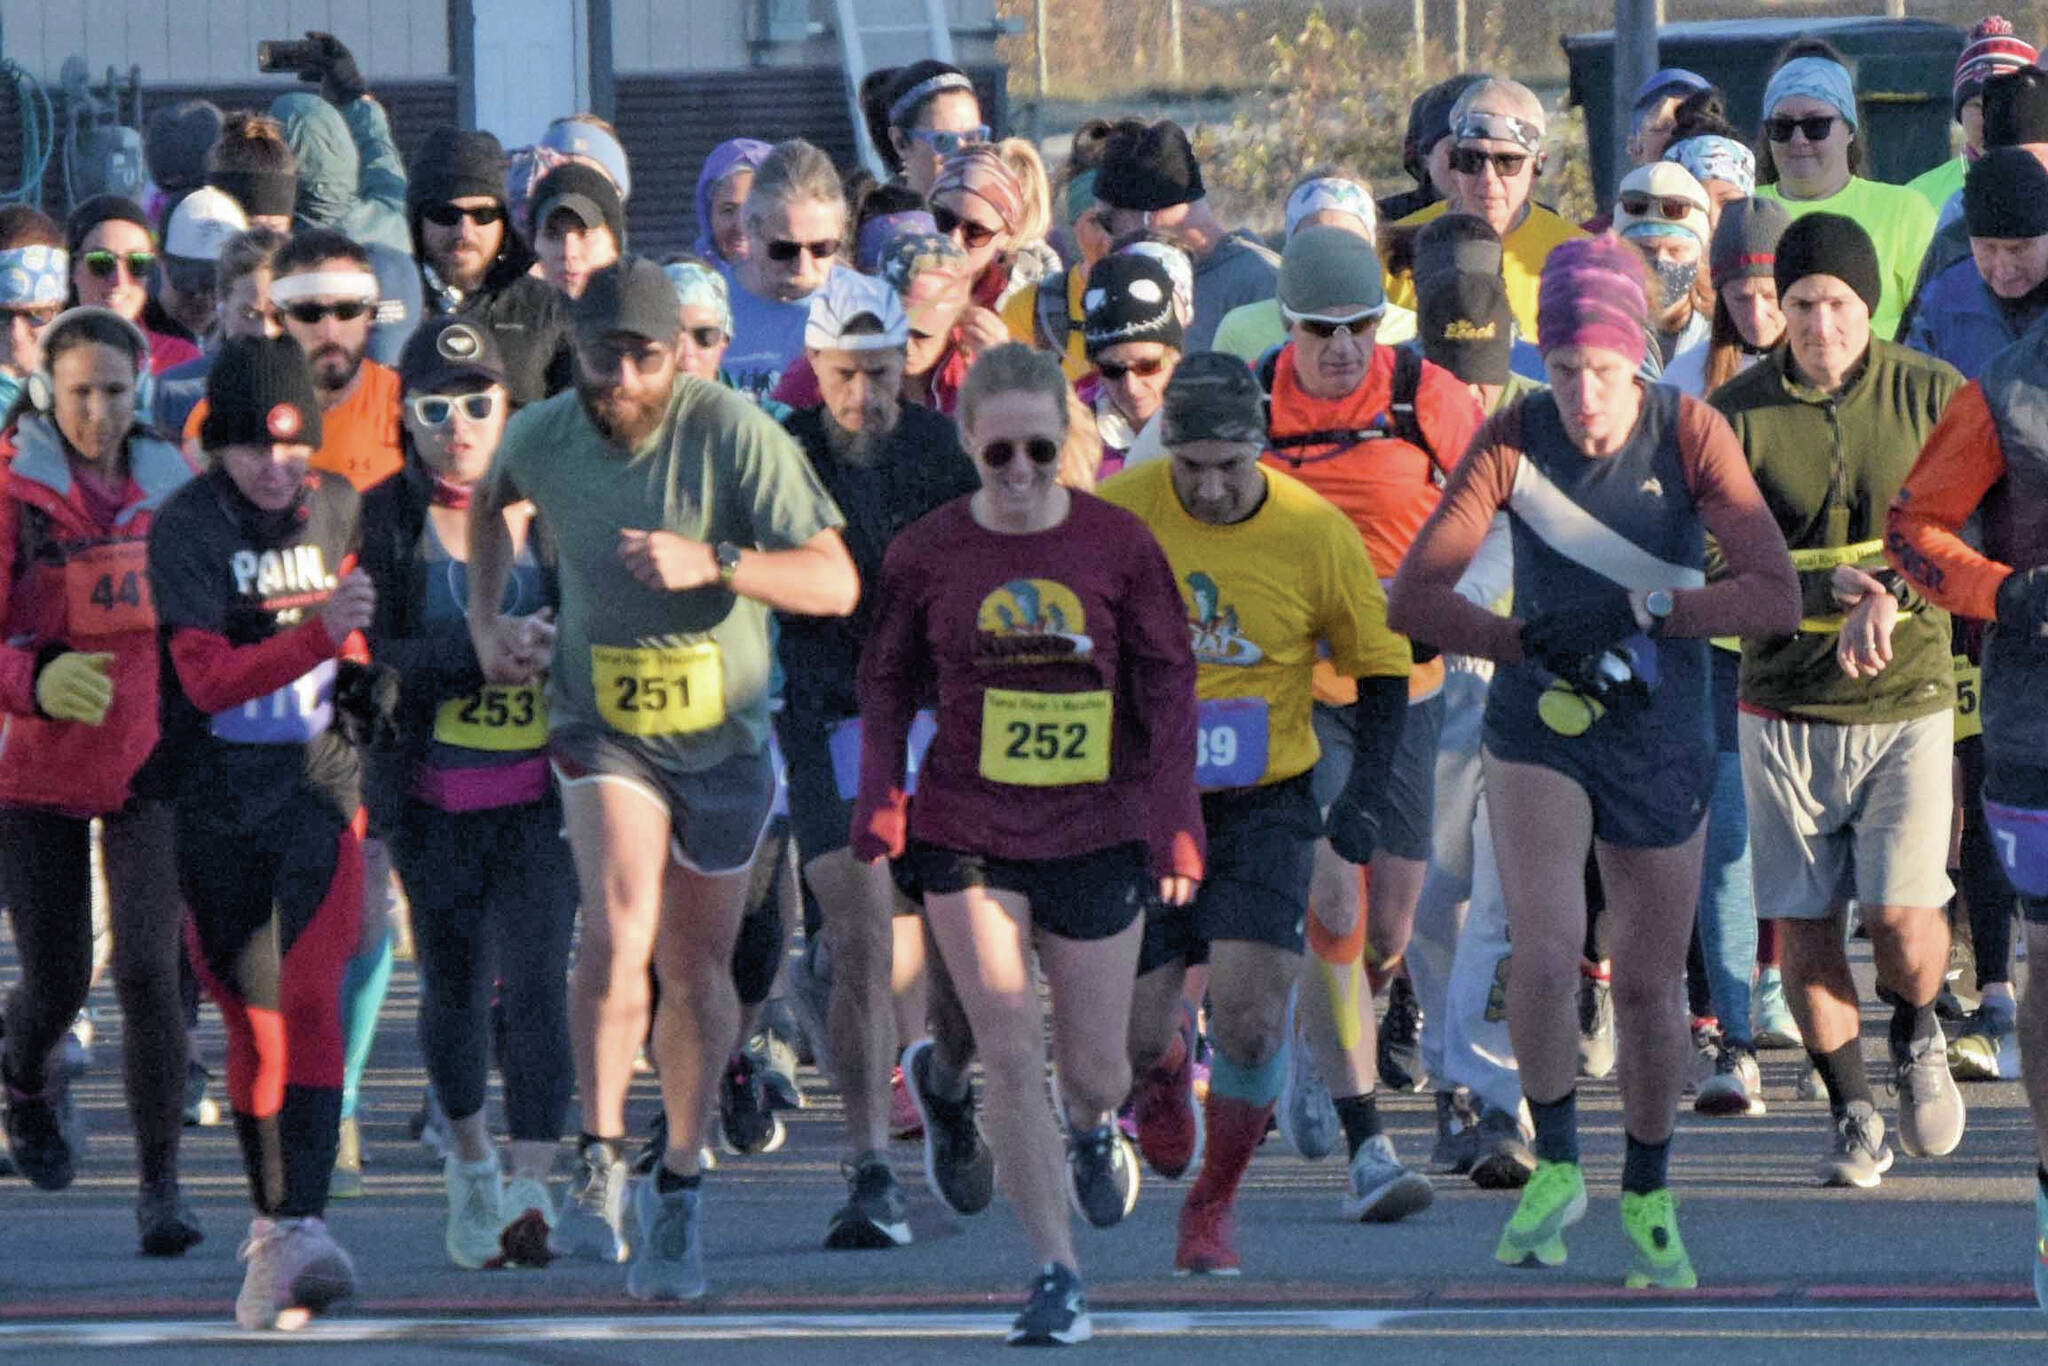 Photo by Jeff Helminiak/Peninsula Clarion
Author Kat Sorensen (252) and the rest of the field take off from the starting line at the Kenai River Marathon on Sunday, Sept. 26 in Kenai.